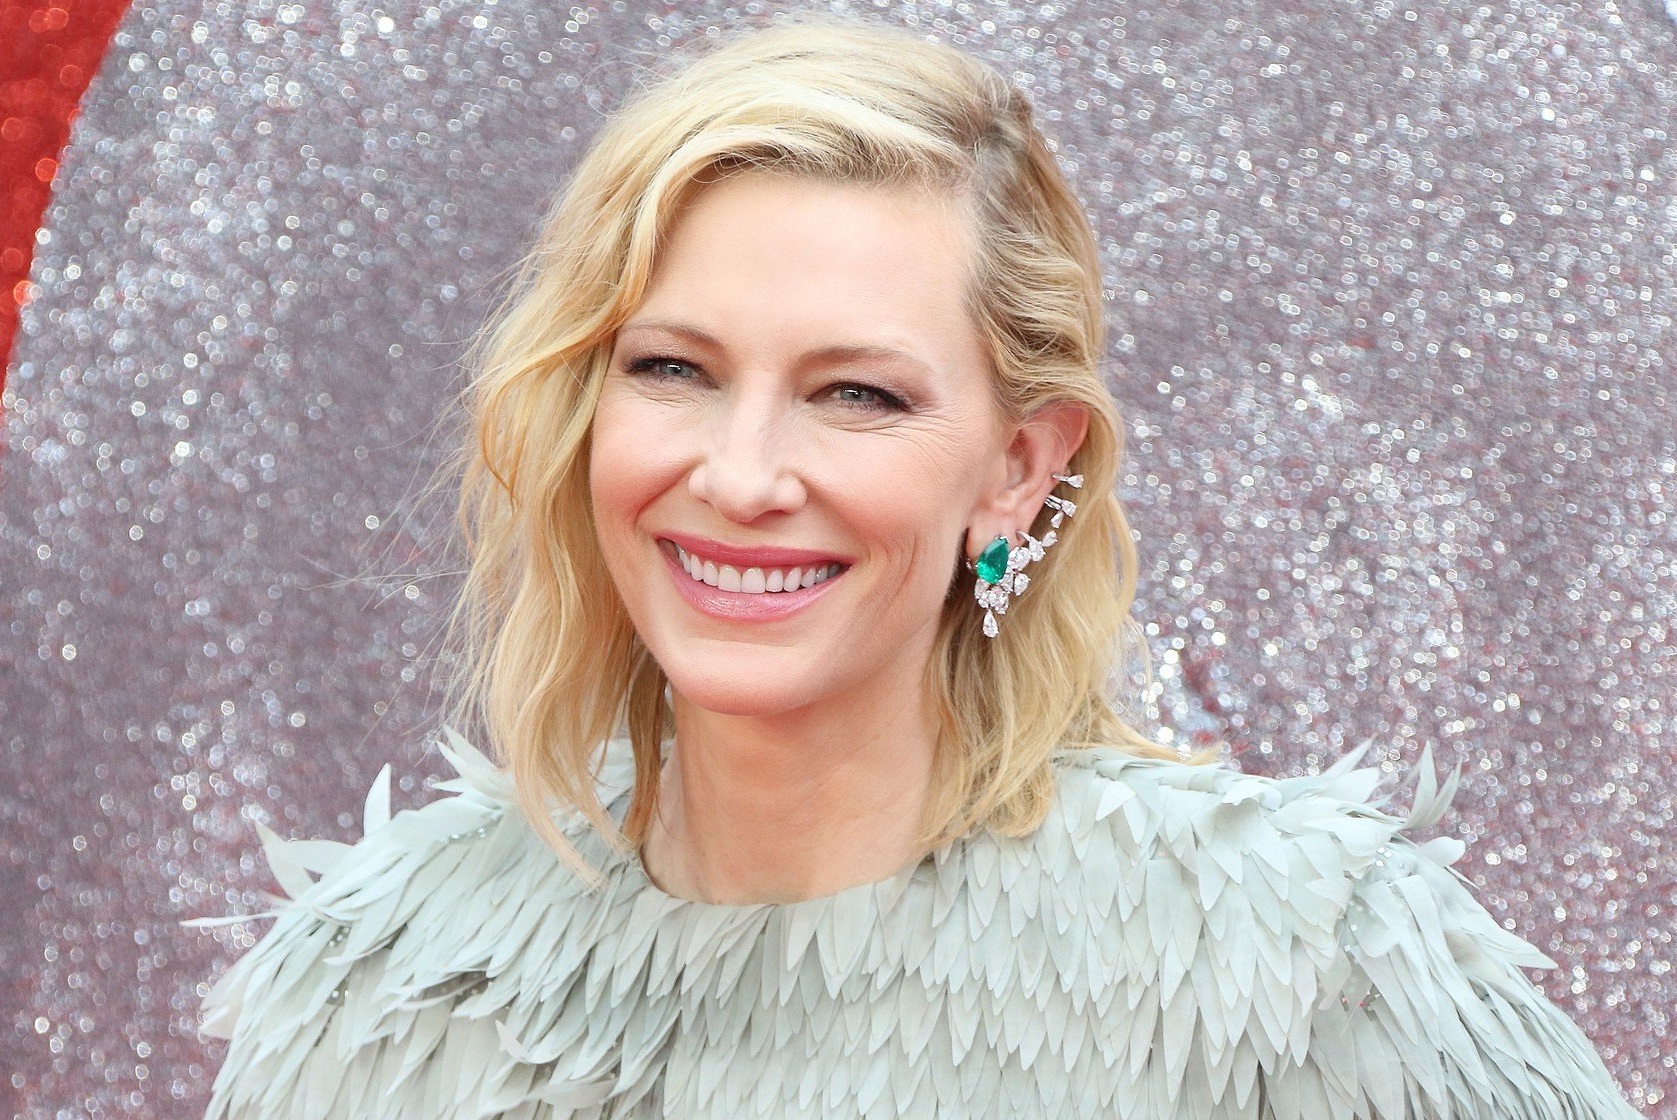 Cate Blanchett, Oceanís 8 - European Premiere, Leicester Square, London, UK, 13 June 2018, RG/PQ/MCI, Image: 374910715, License: Rights-managed, Restrictions: NONE, Model Release: no, Credit line: Profimedia, Whats Up